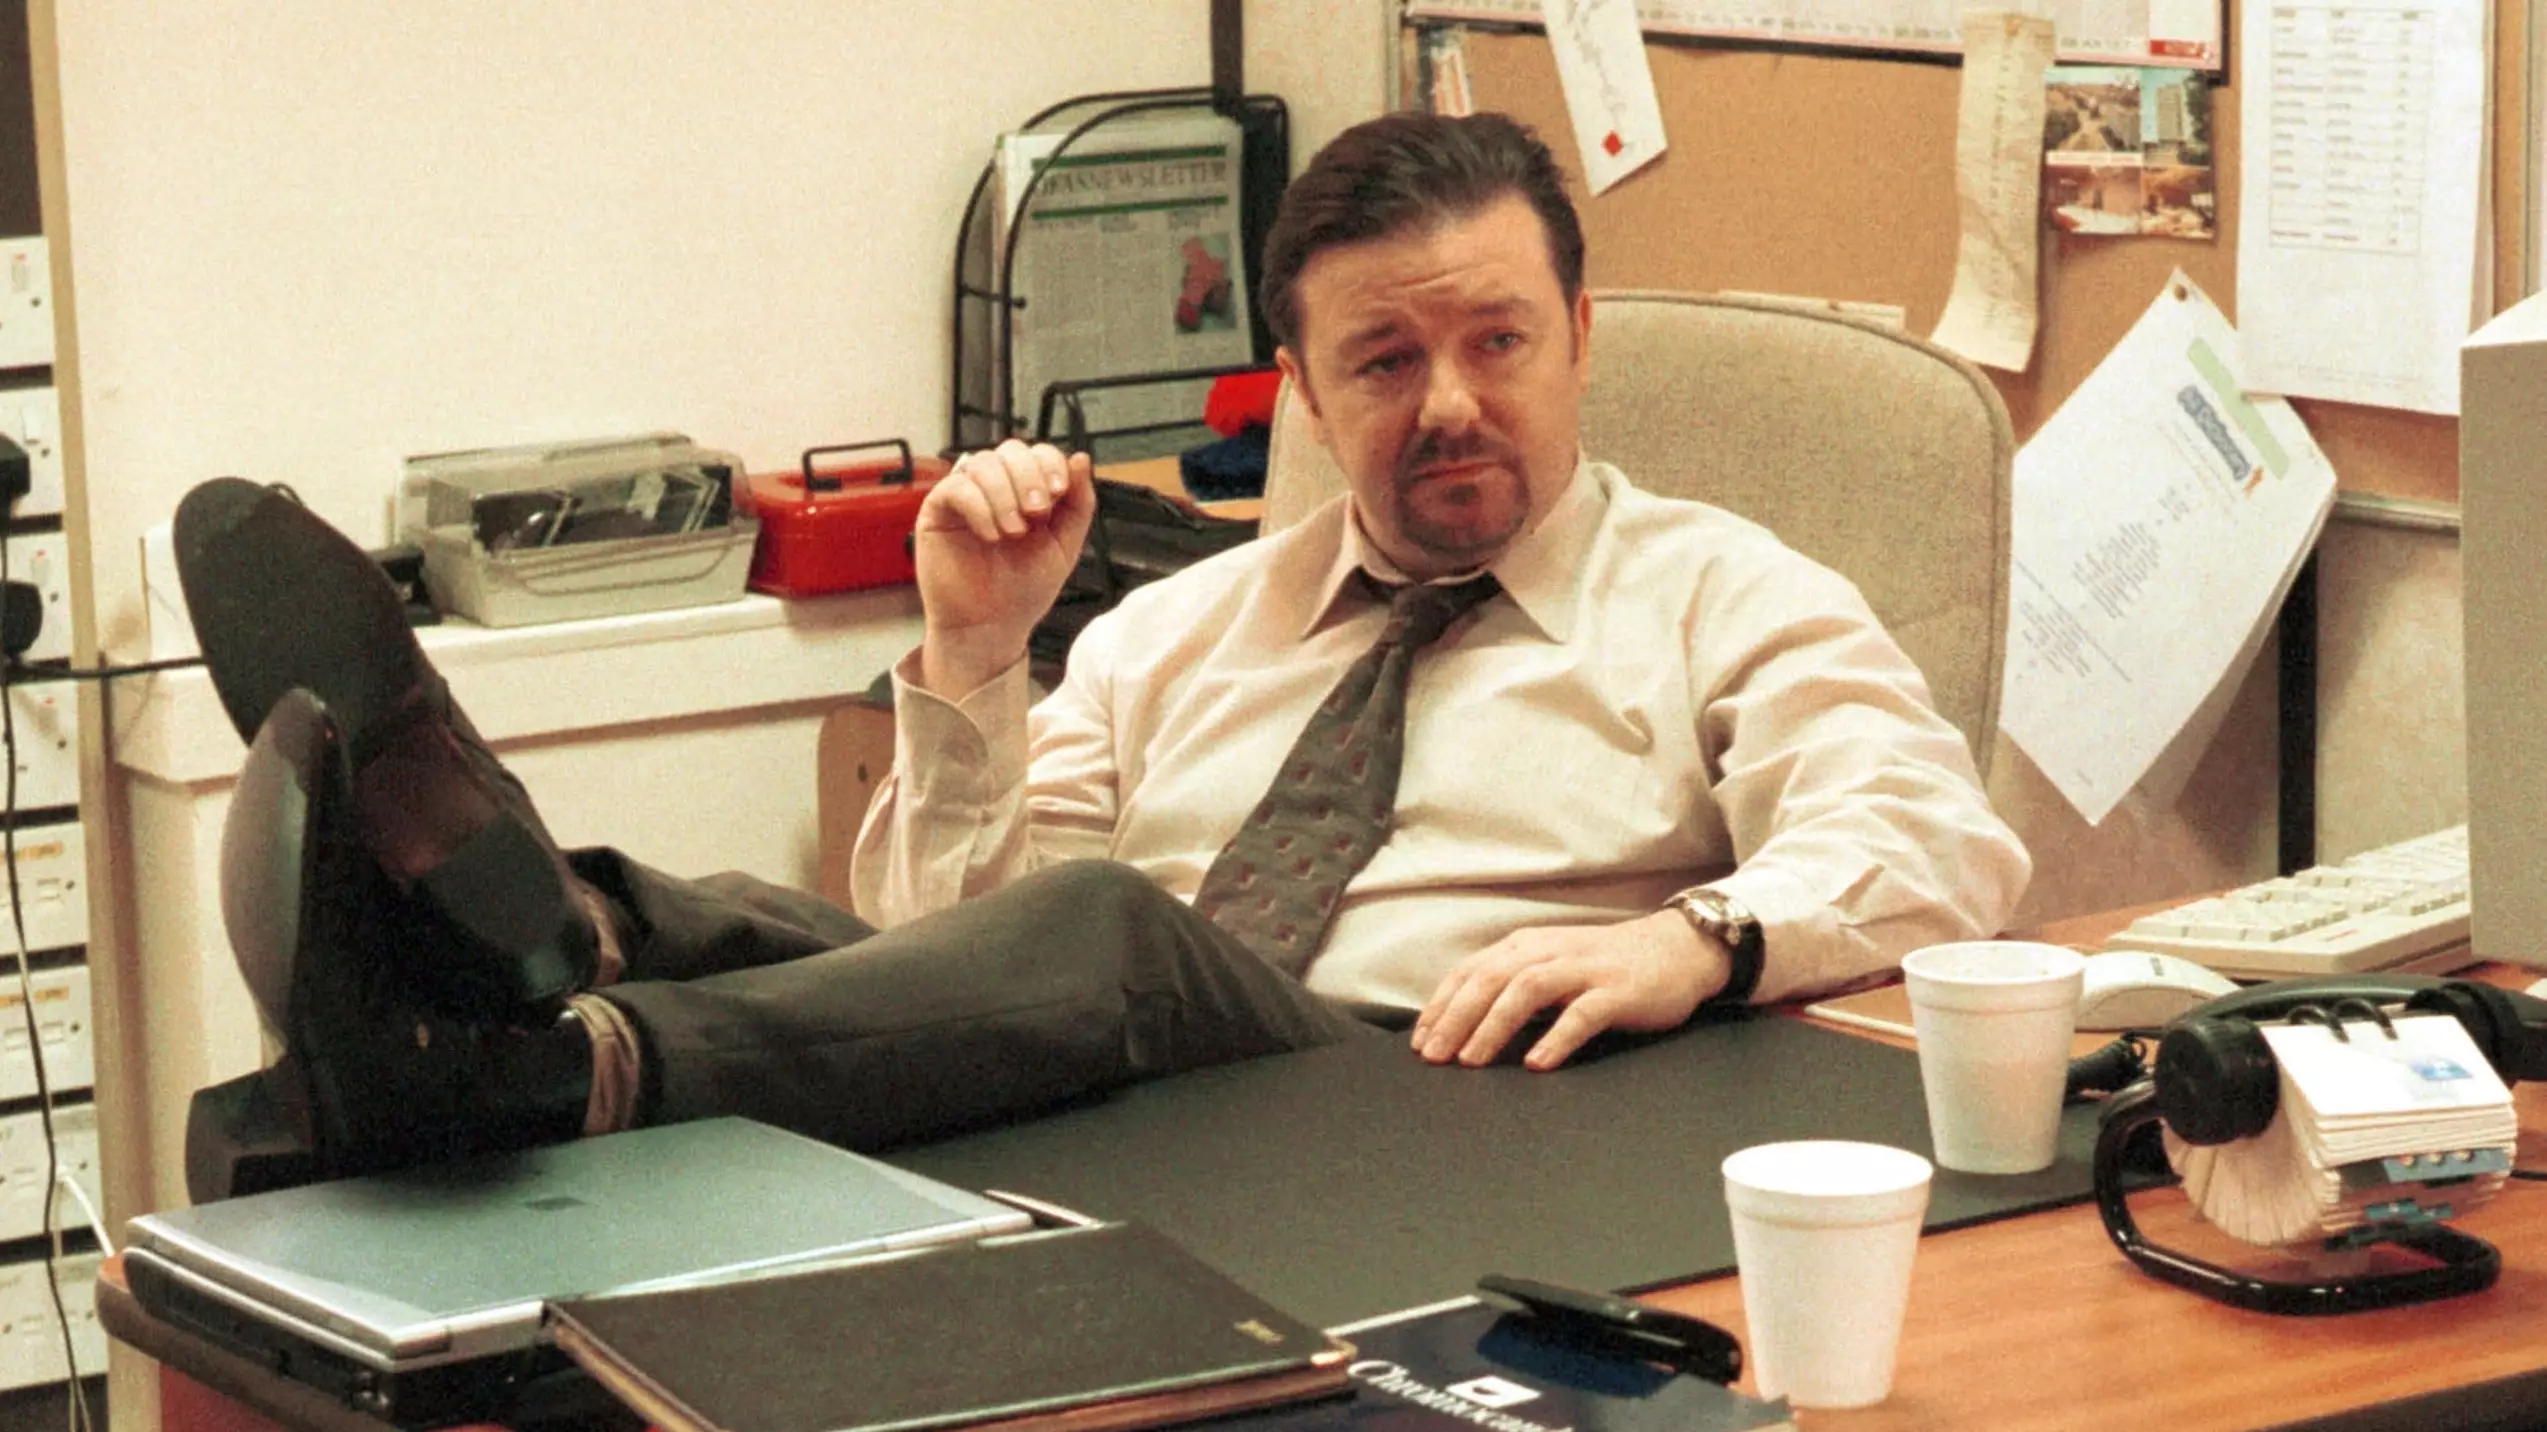 ​Fantasising About Murdering Your Boss Is A Natural, Positive Thing - Says Psychologist